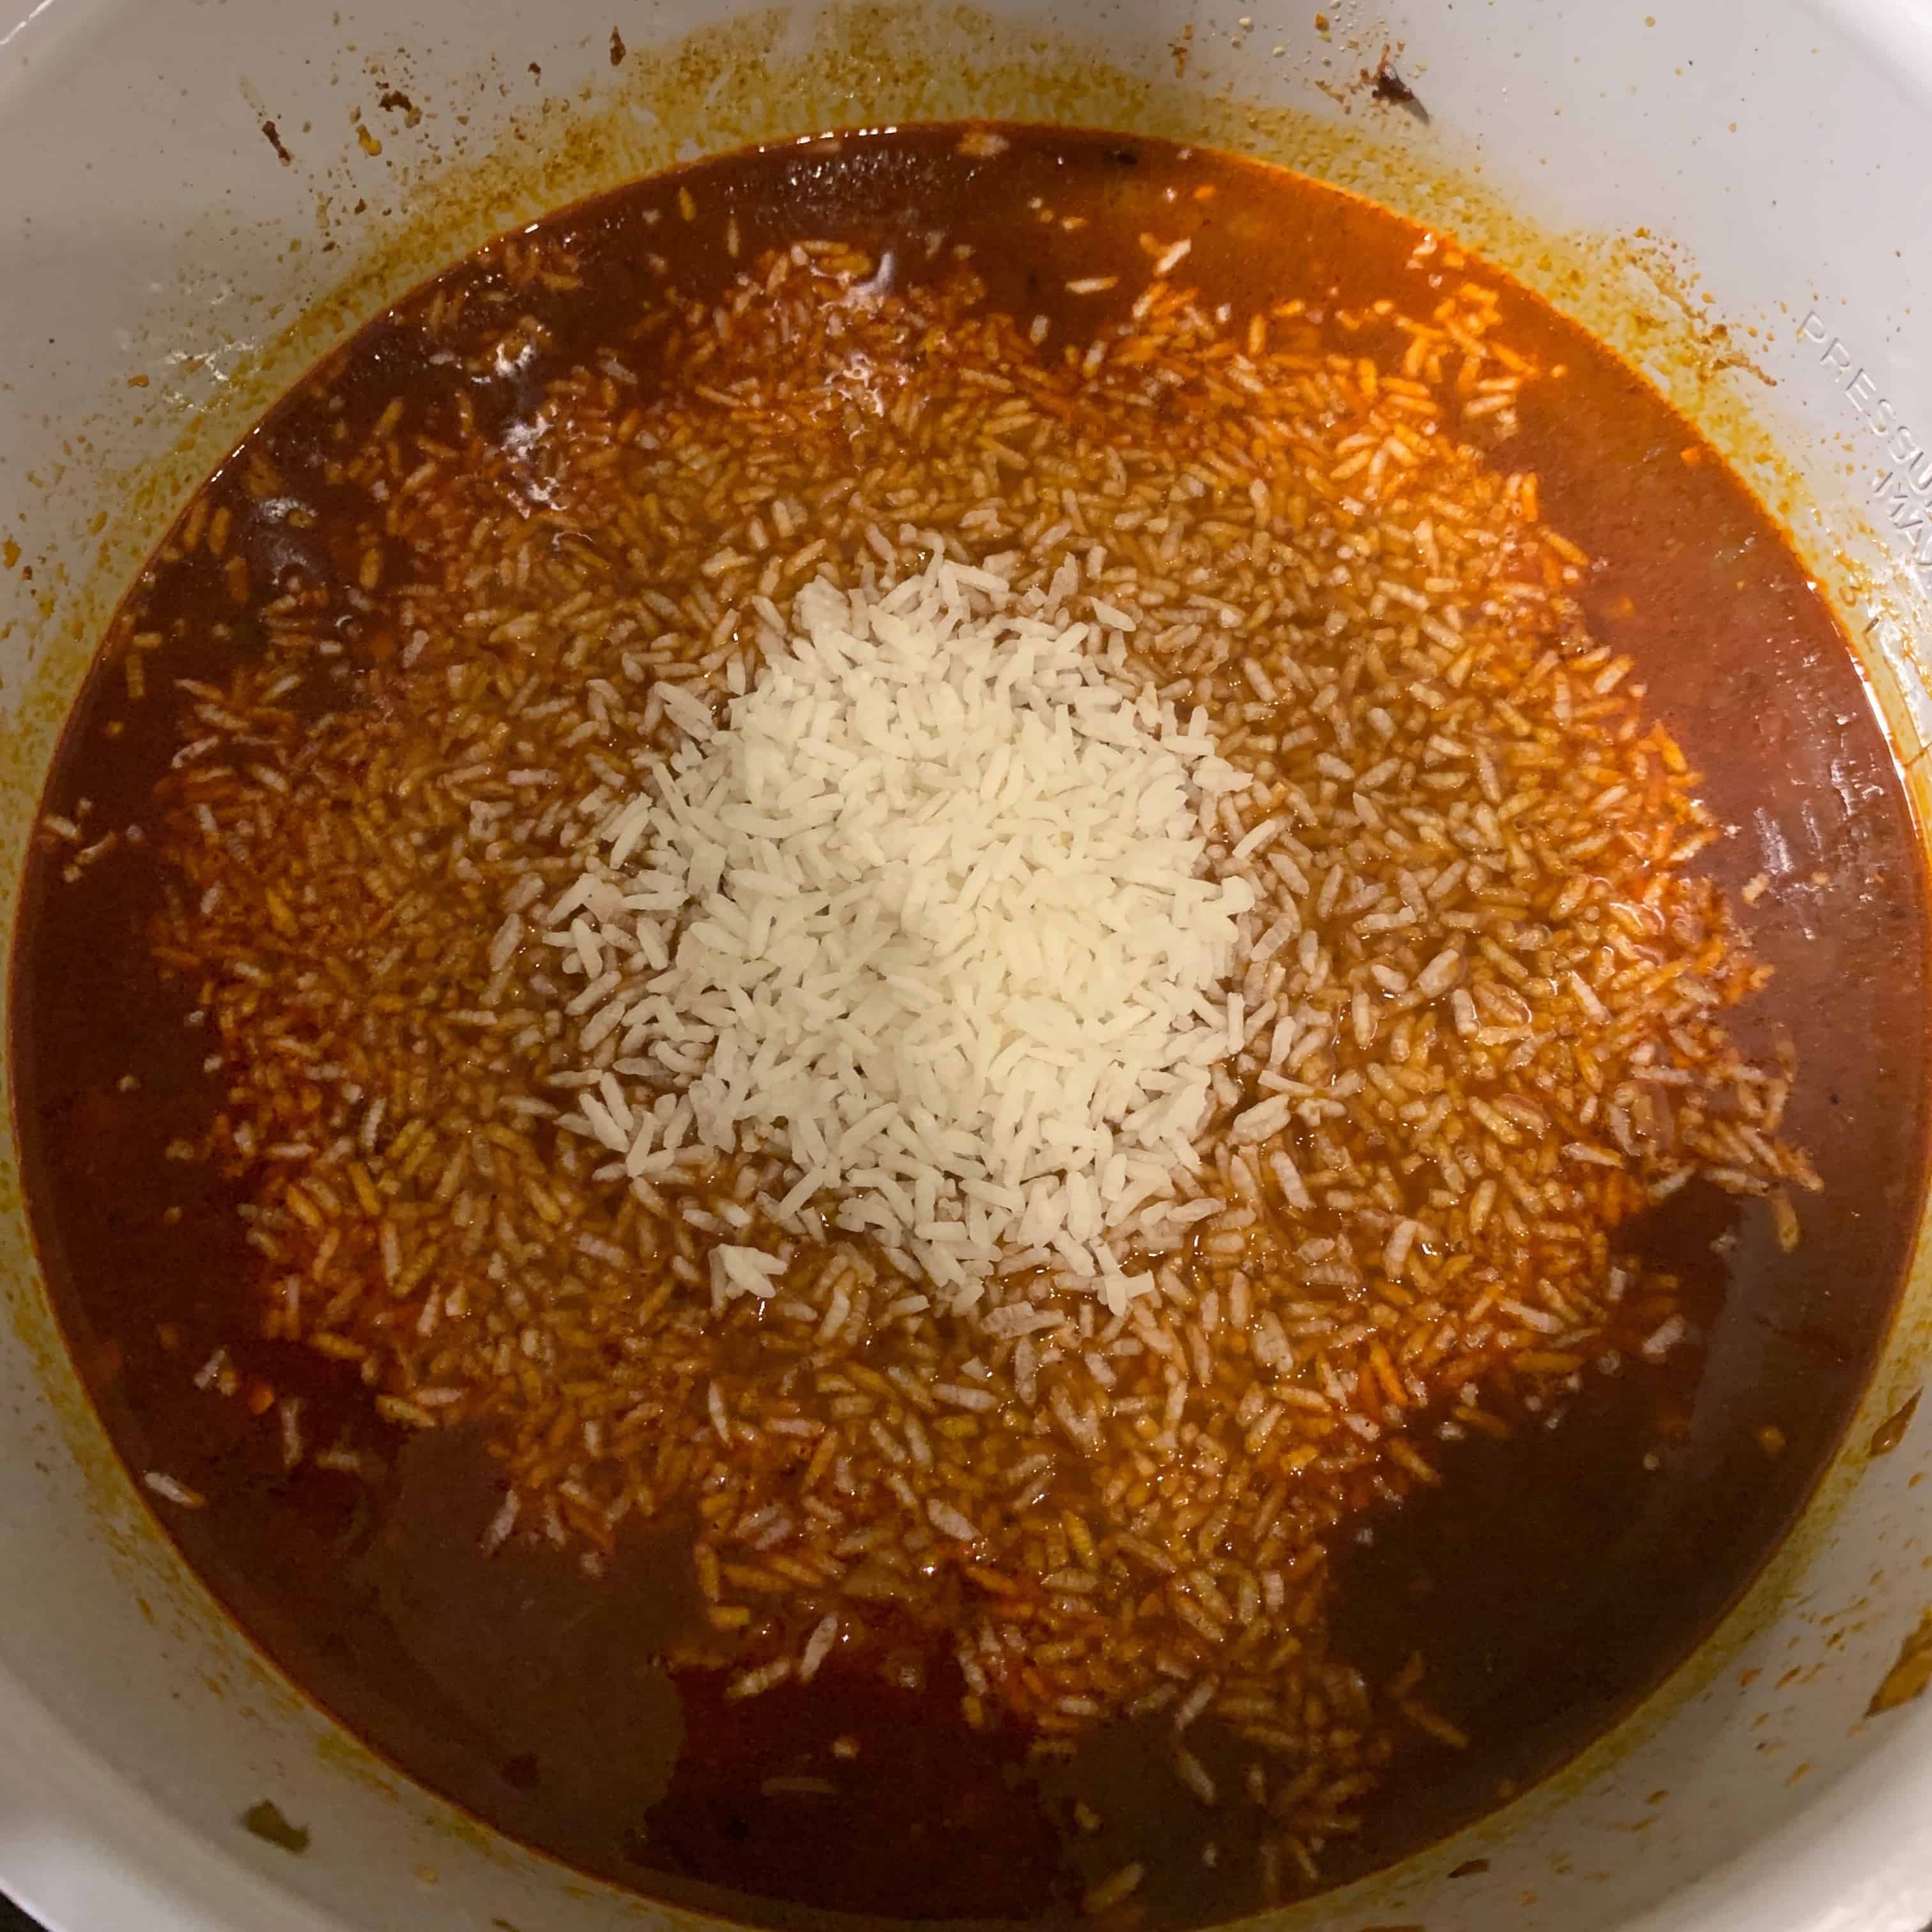 rice added to the Texas chili